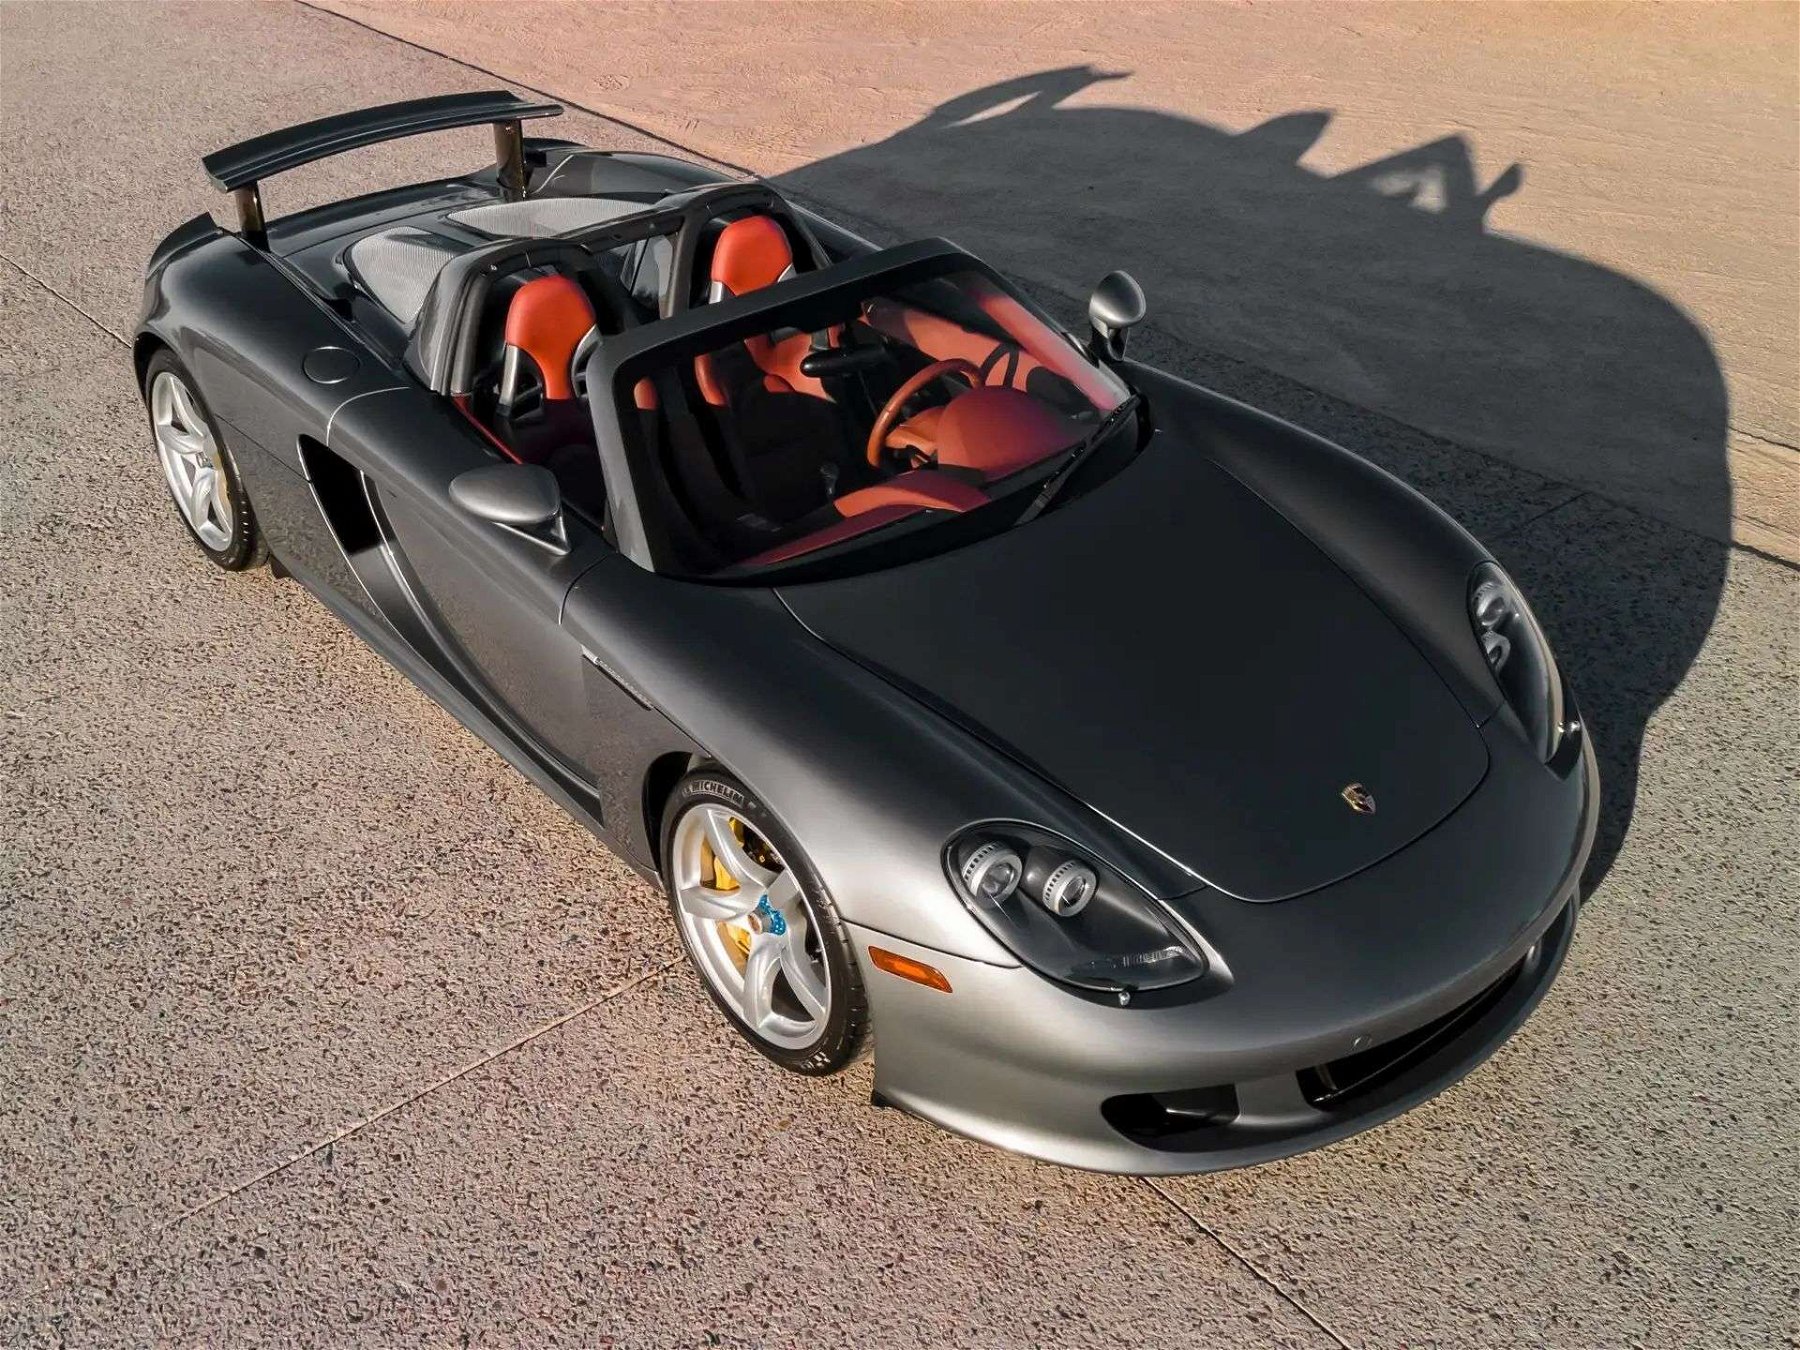 This 2005 Porsche Carrera GT Is Heading to Auction Without Reserve